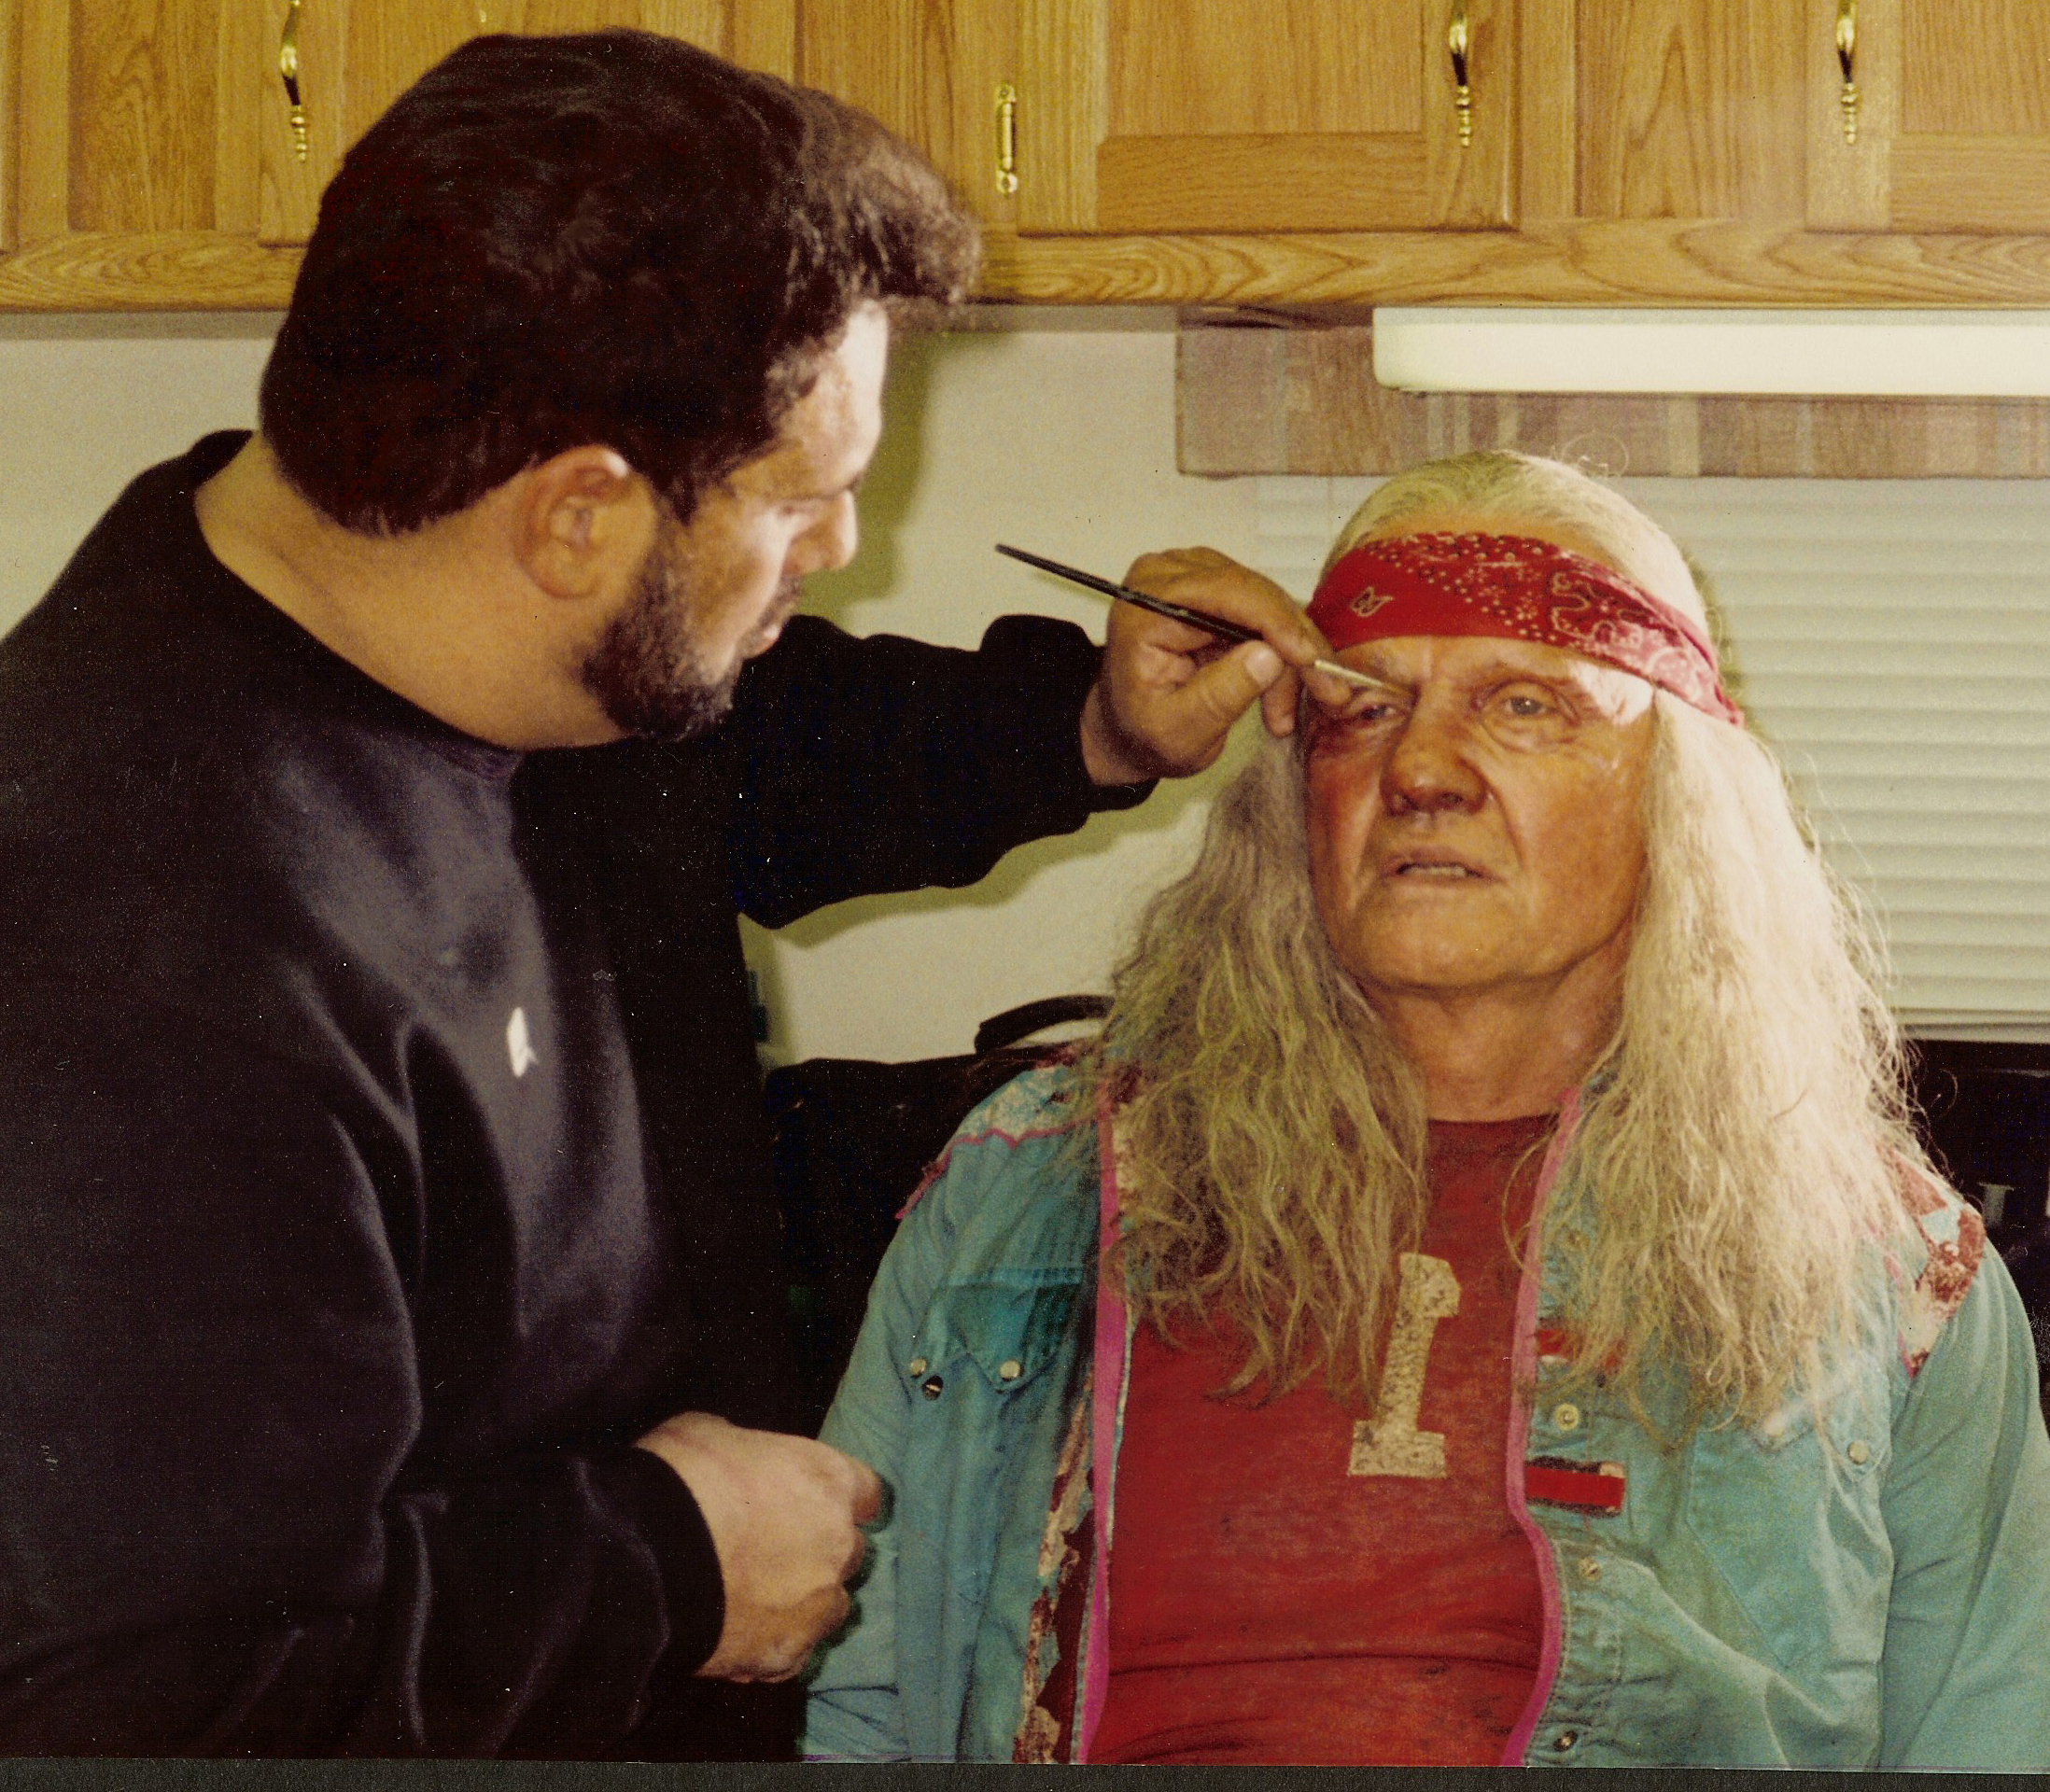 Ken Diaz applying the sun baked, homeless, half breed Native American Shaman makeup, to Jon Voight who is playing the Blind Man in 